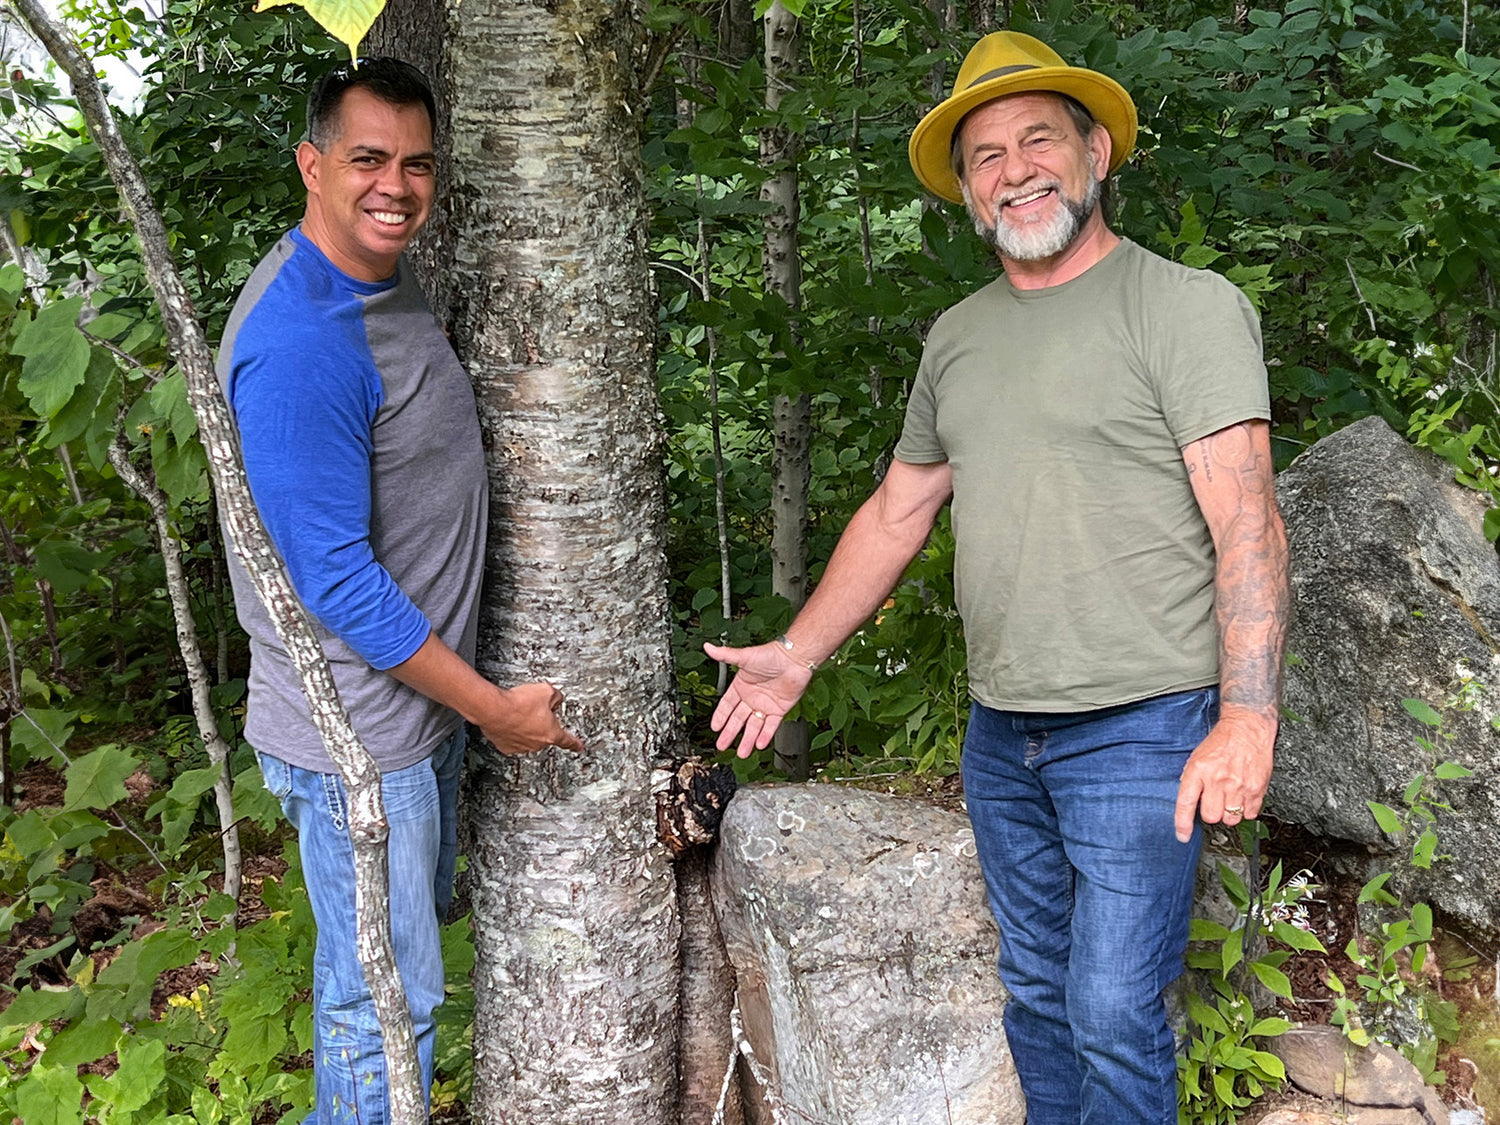 Rich and Mark in the woods with a chaga mushroom